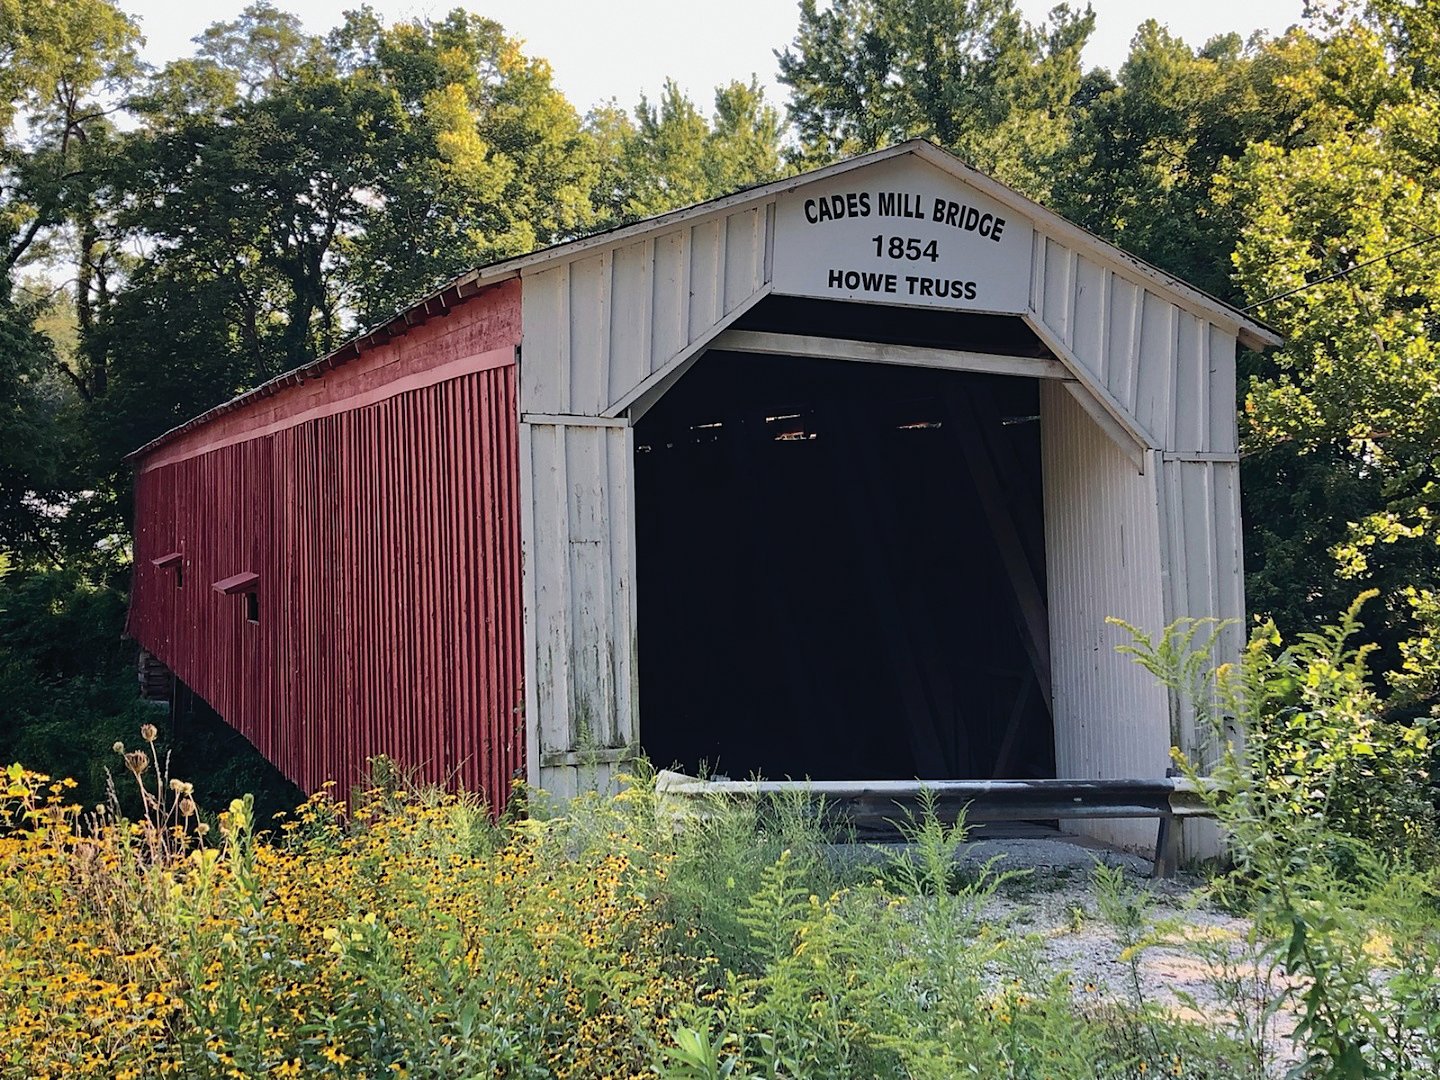 Built in 1854, the Cades Mill Covered Bridge is the oldest covered bridge still on its original site. Years of neglect and inclement weather have taken its toll. It has been named to Indiana Landmarks 10 Most Endangered list.